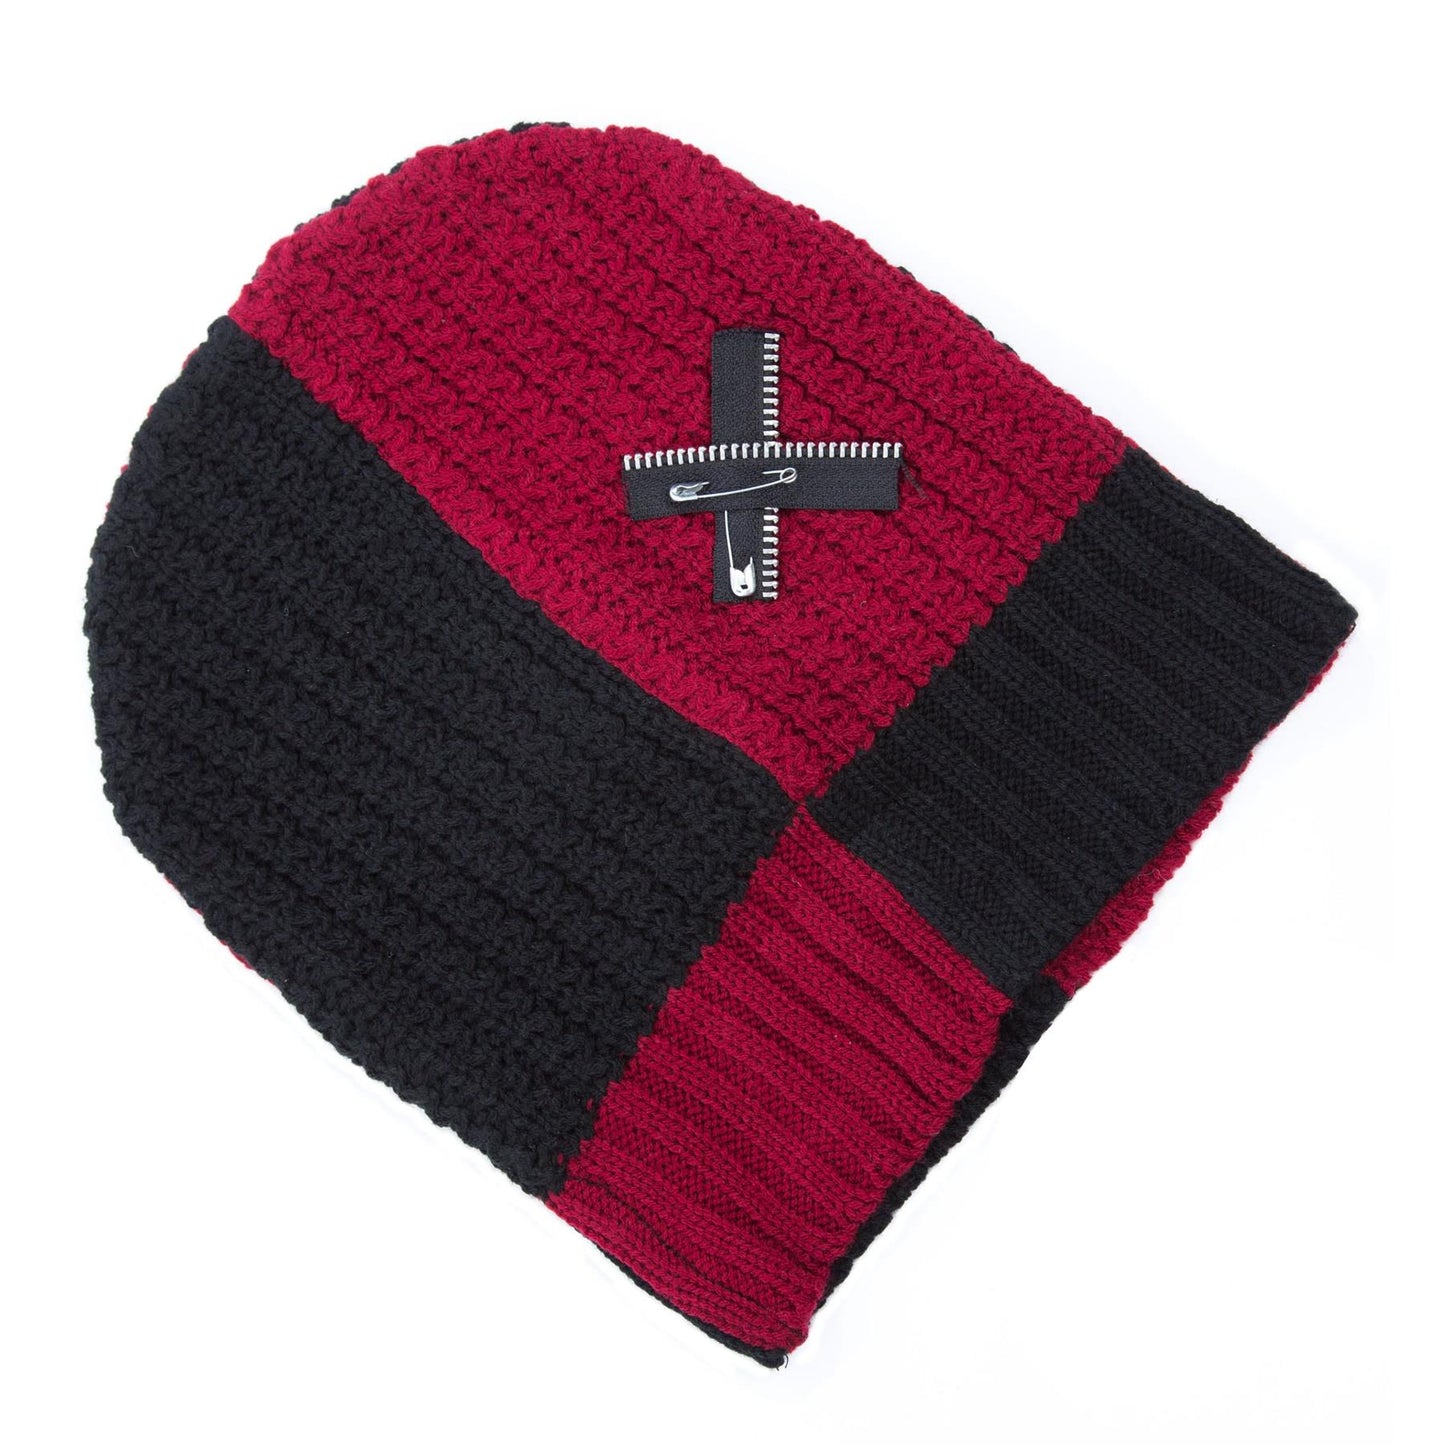 PITCH HATE HAT LADIES RED/BLACK SIZE O/S